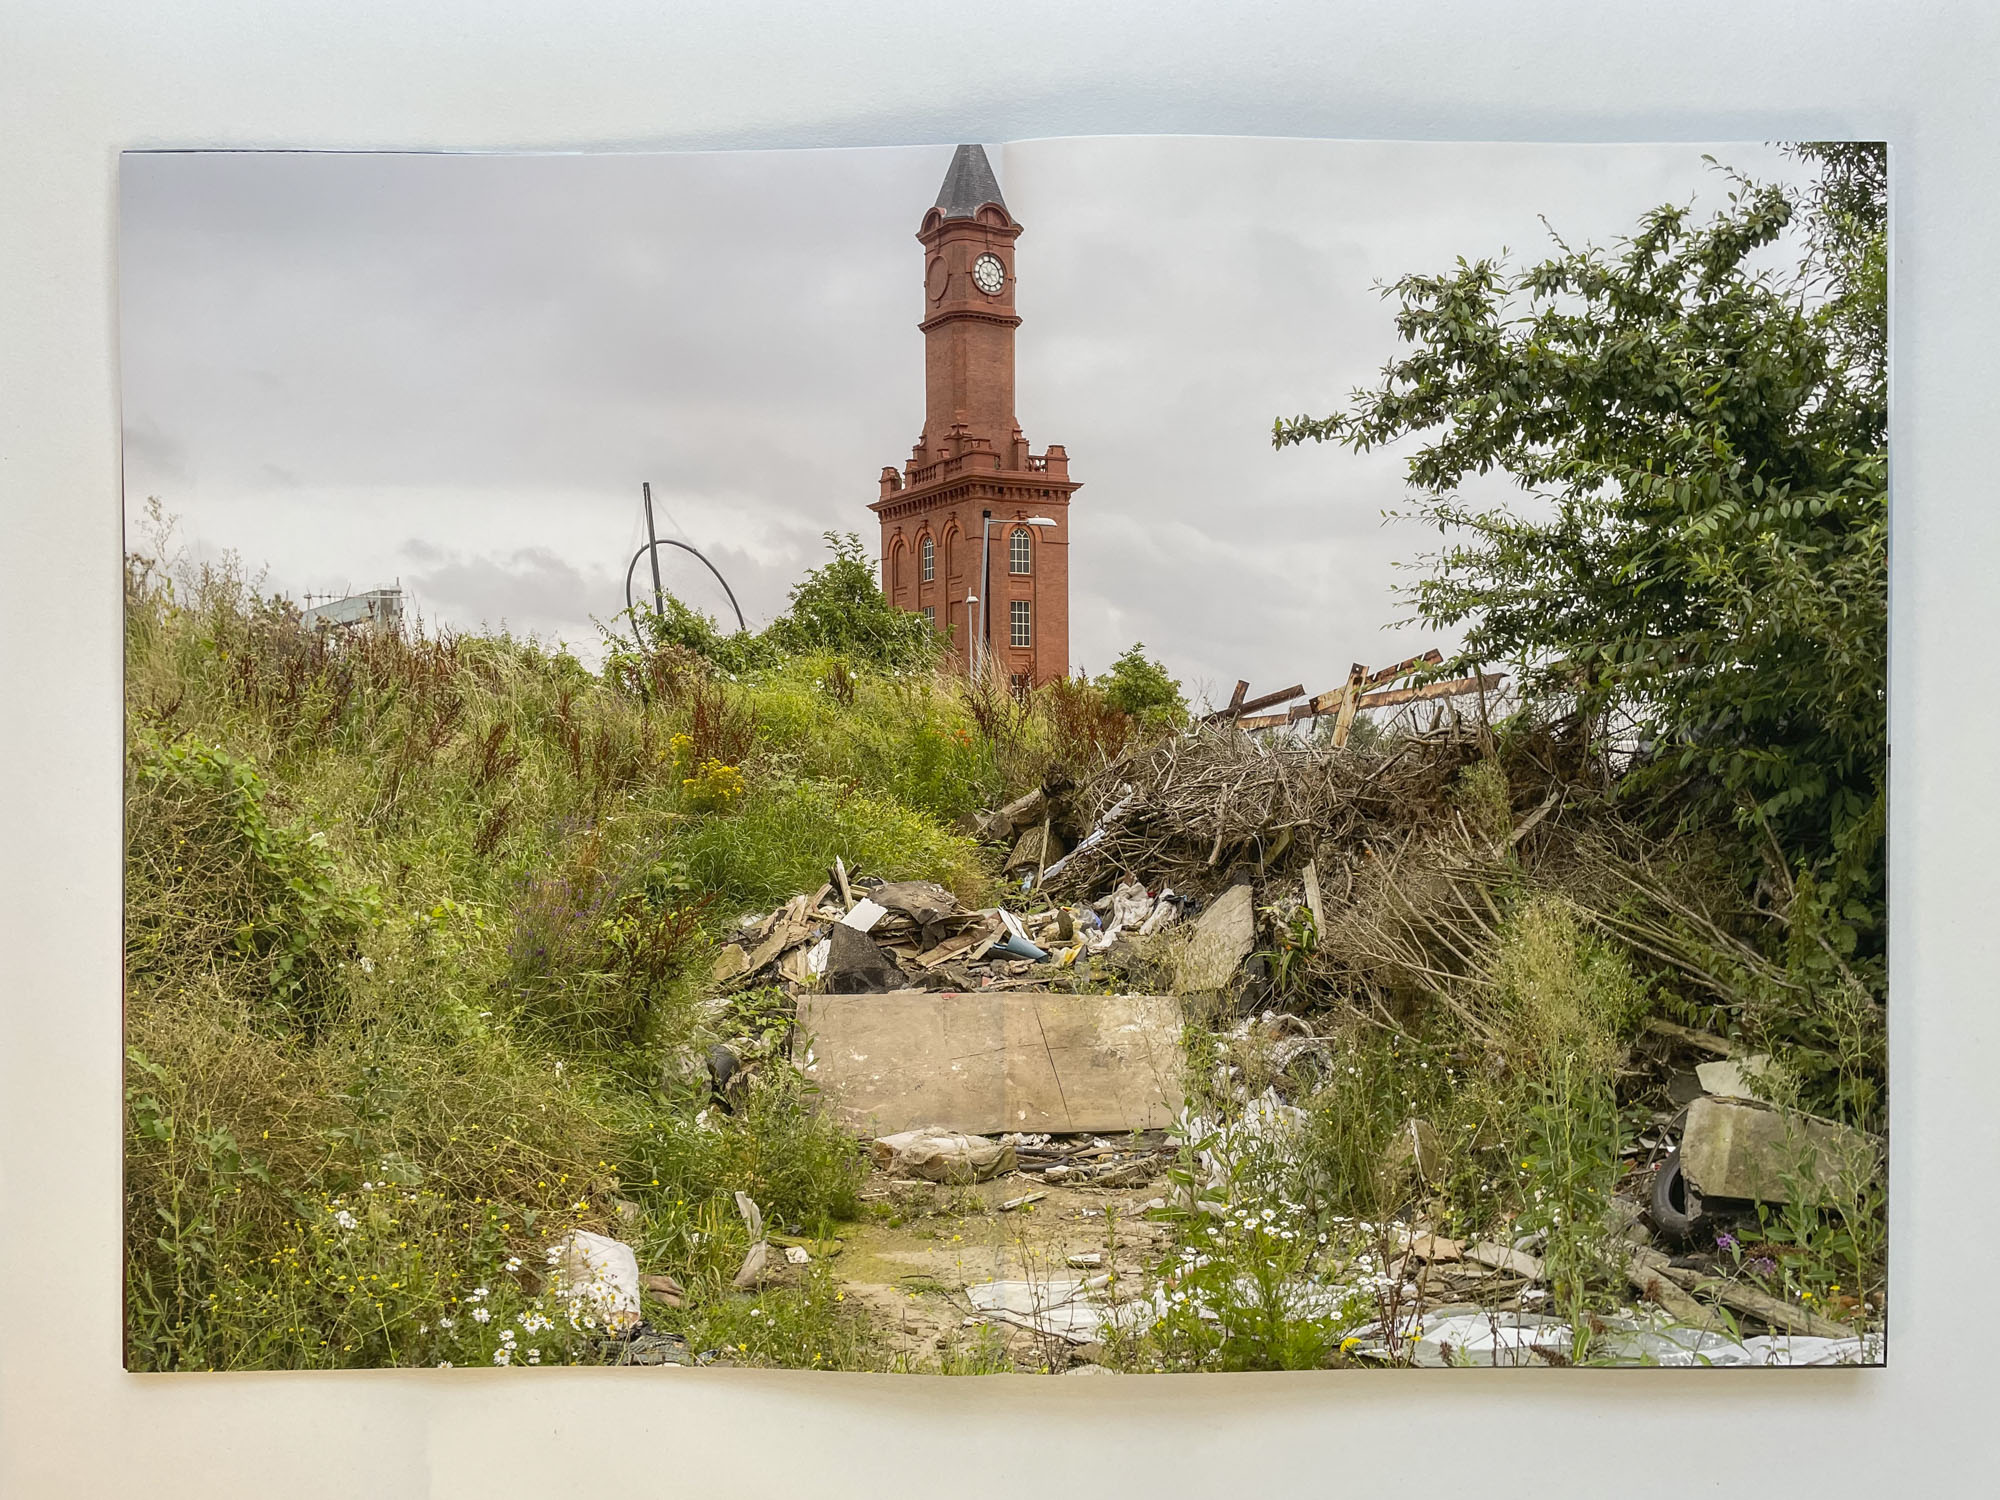 in the foreground detritus behind which a red brick clock tower rises against the sky, the clock faces are missing their hands